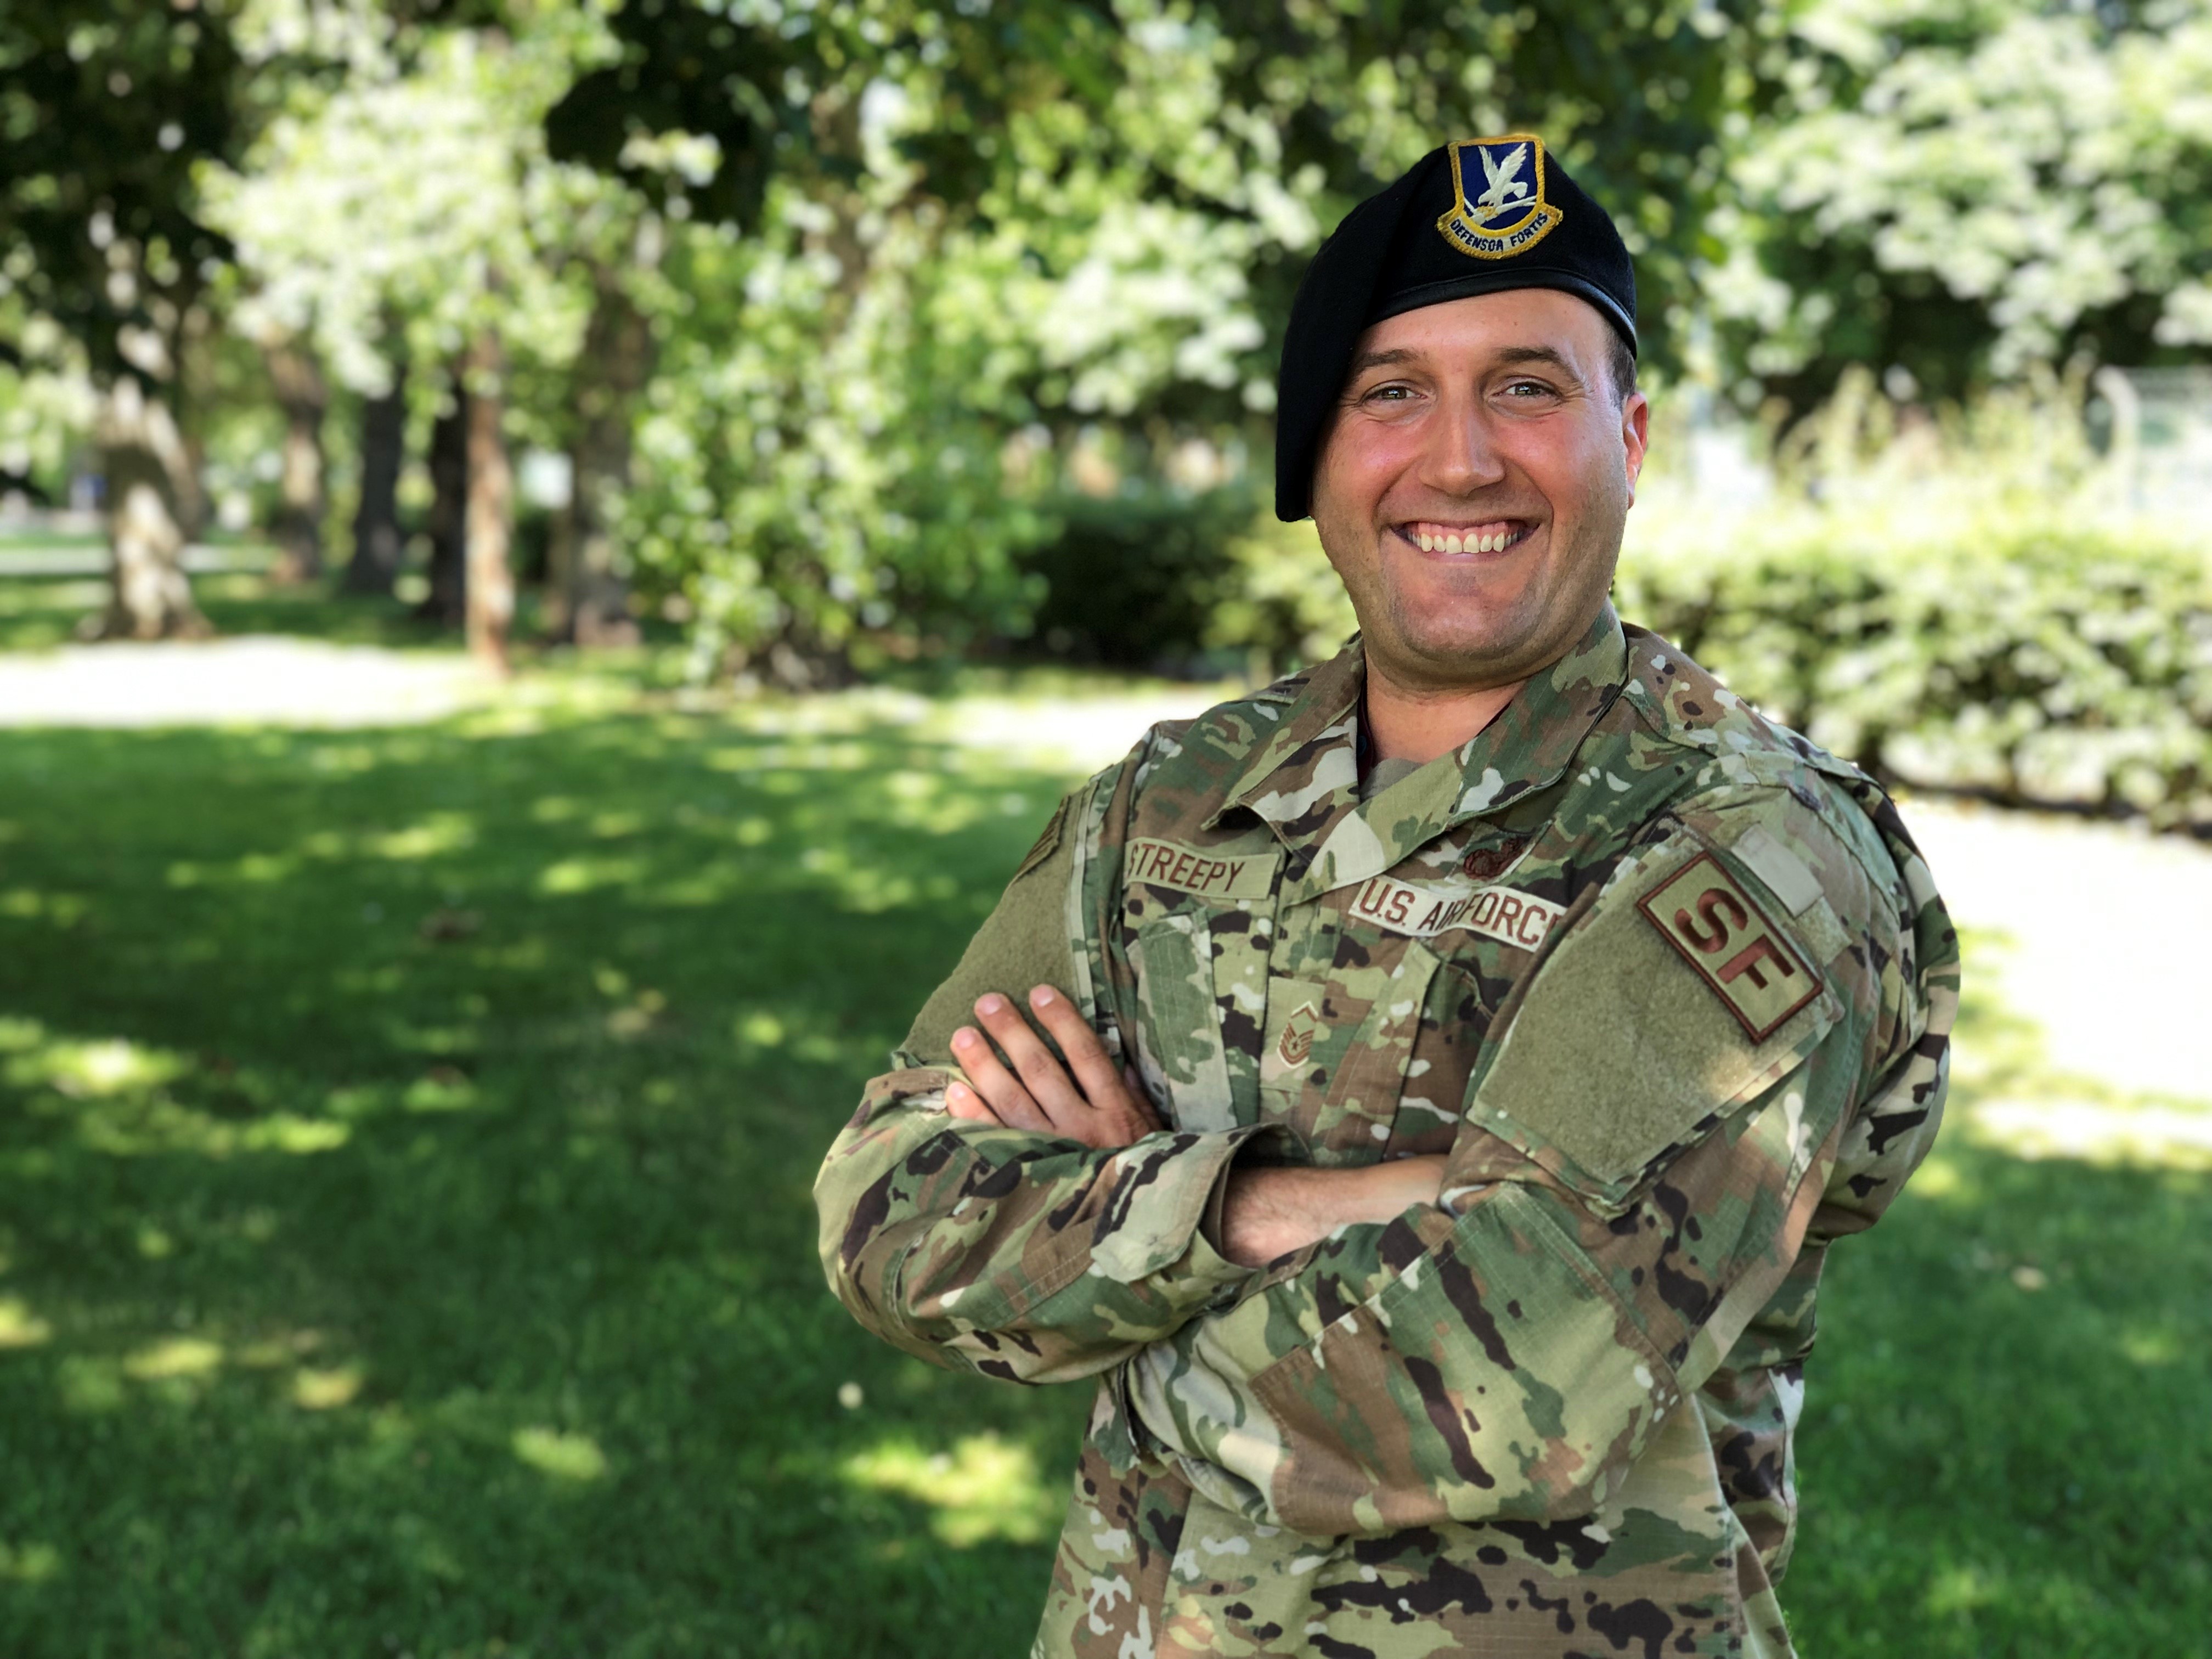 Image shows US soldier smiling ouside.